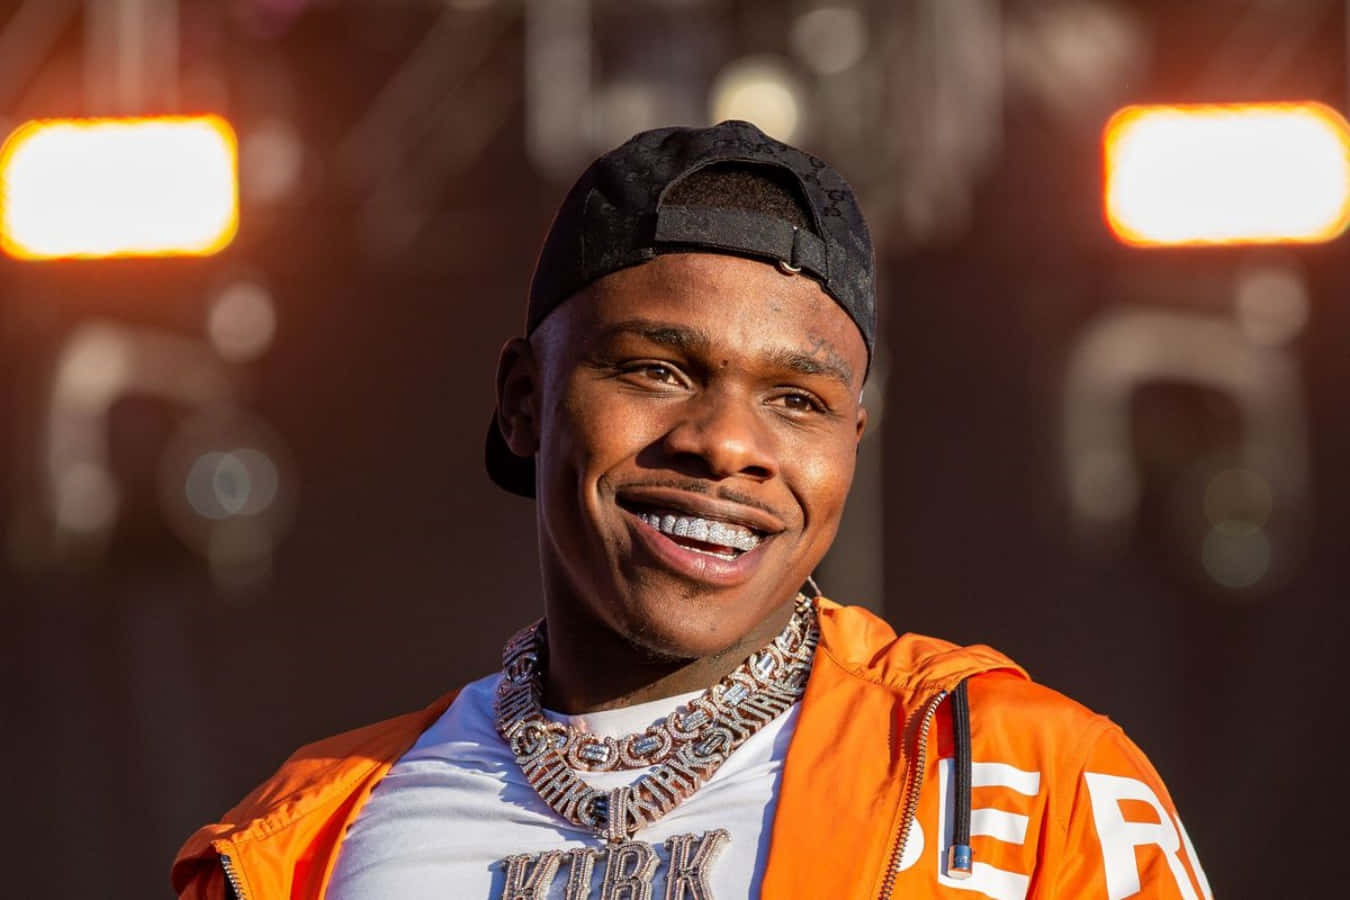 DaBaby Performs Live on Stage